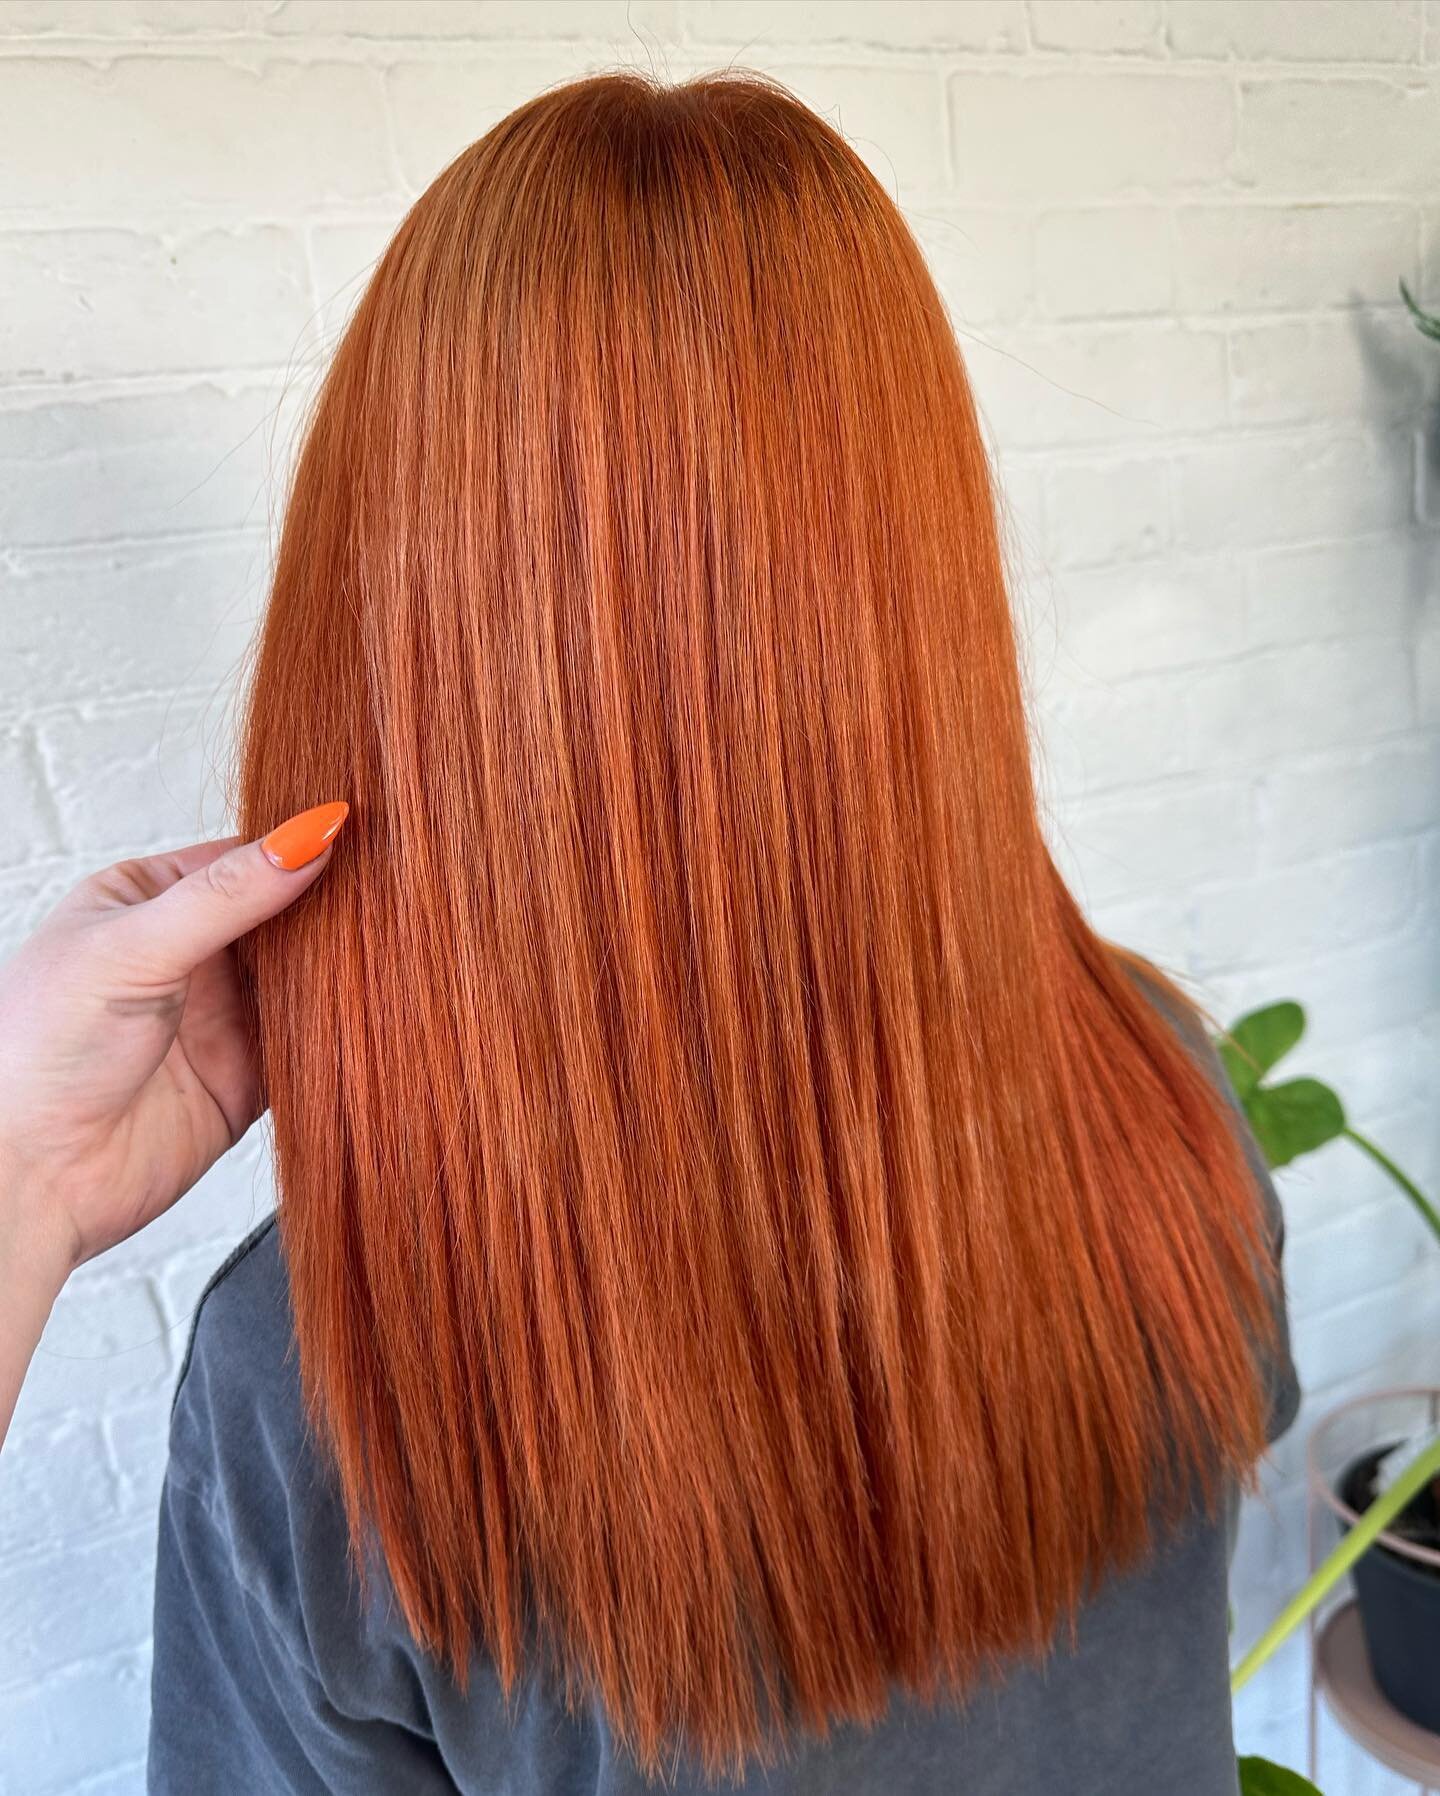 Beautiful colour transformation! 

WE DO LOVE OUR COPPERS 

#hairstyle #hairdresser #copperhair #haireducation #hairtransformation